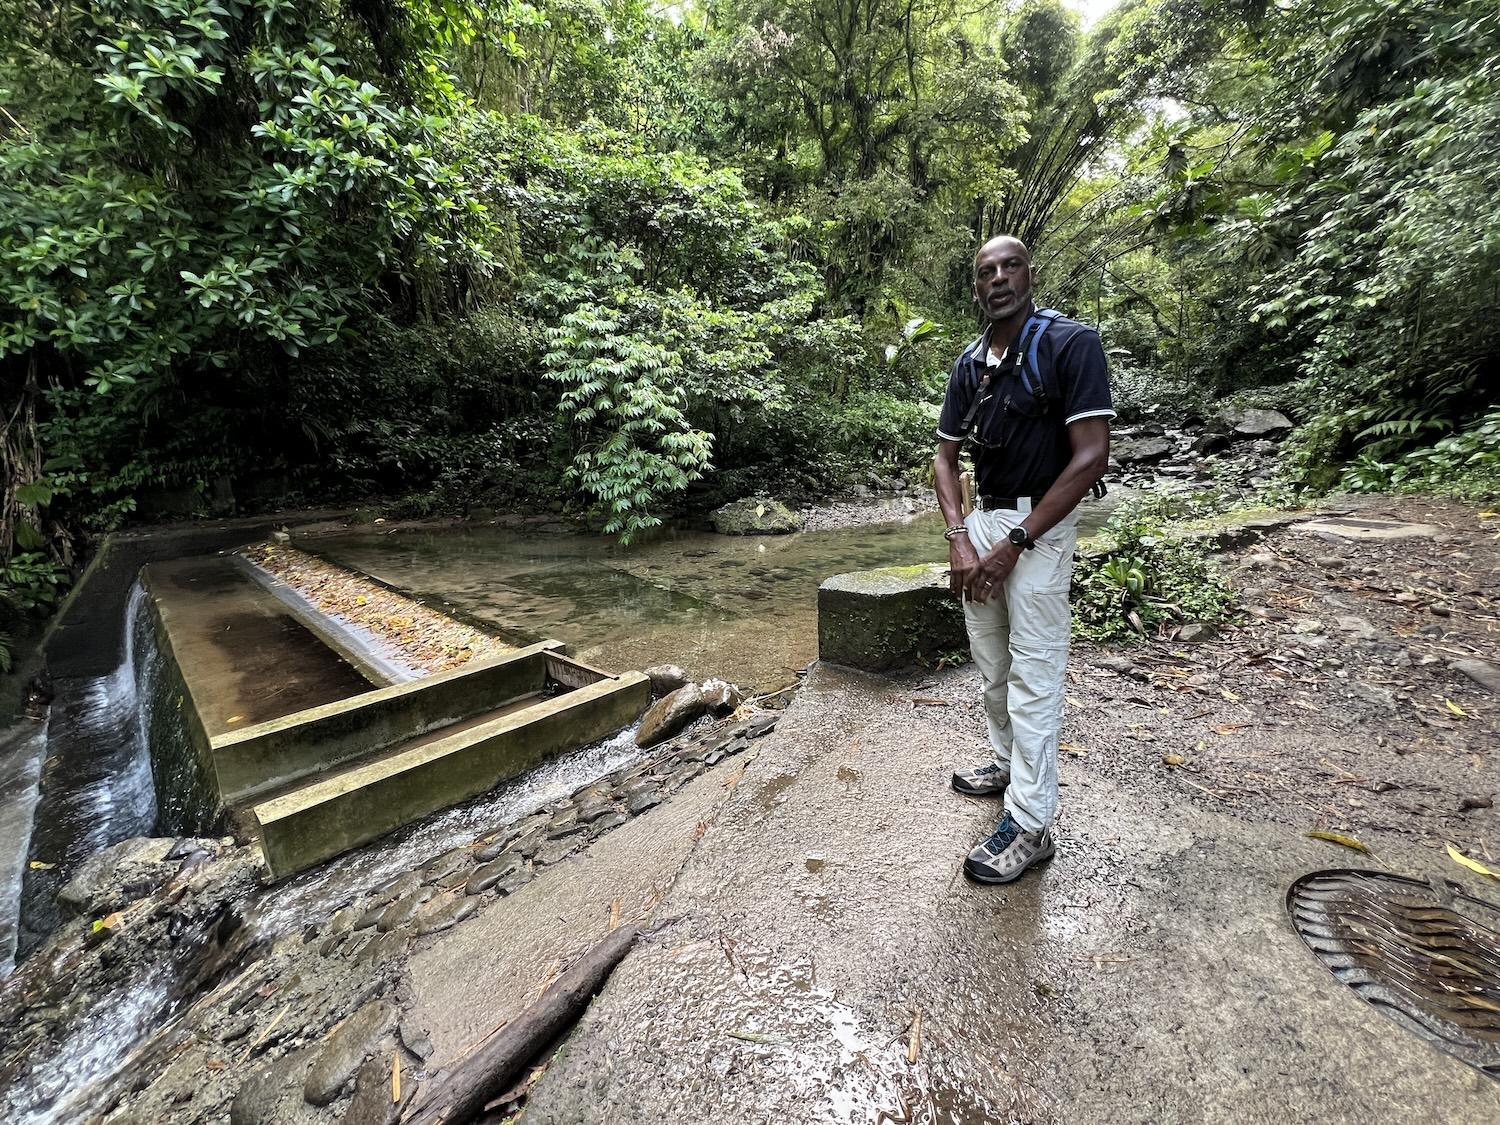 A footbridge is planned for hikers who take the Fontaine Didier-Absalon trail in Martinique. Gilles Vicrobeck, who manages the island's trails and hiking clubs, offers guided hikes.